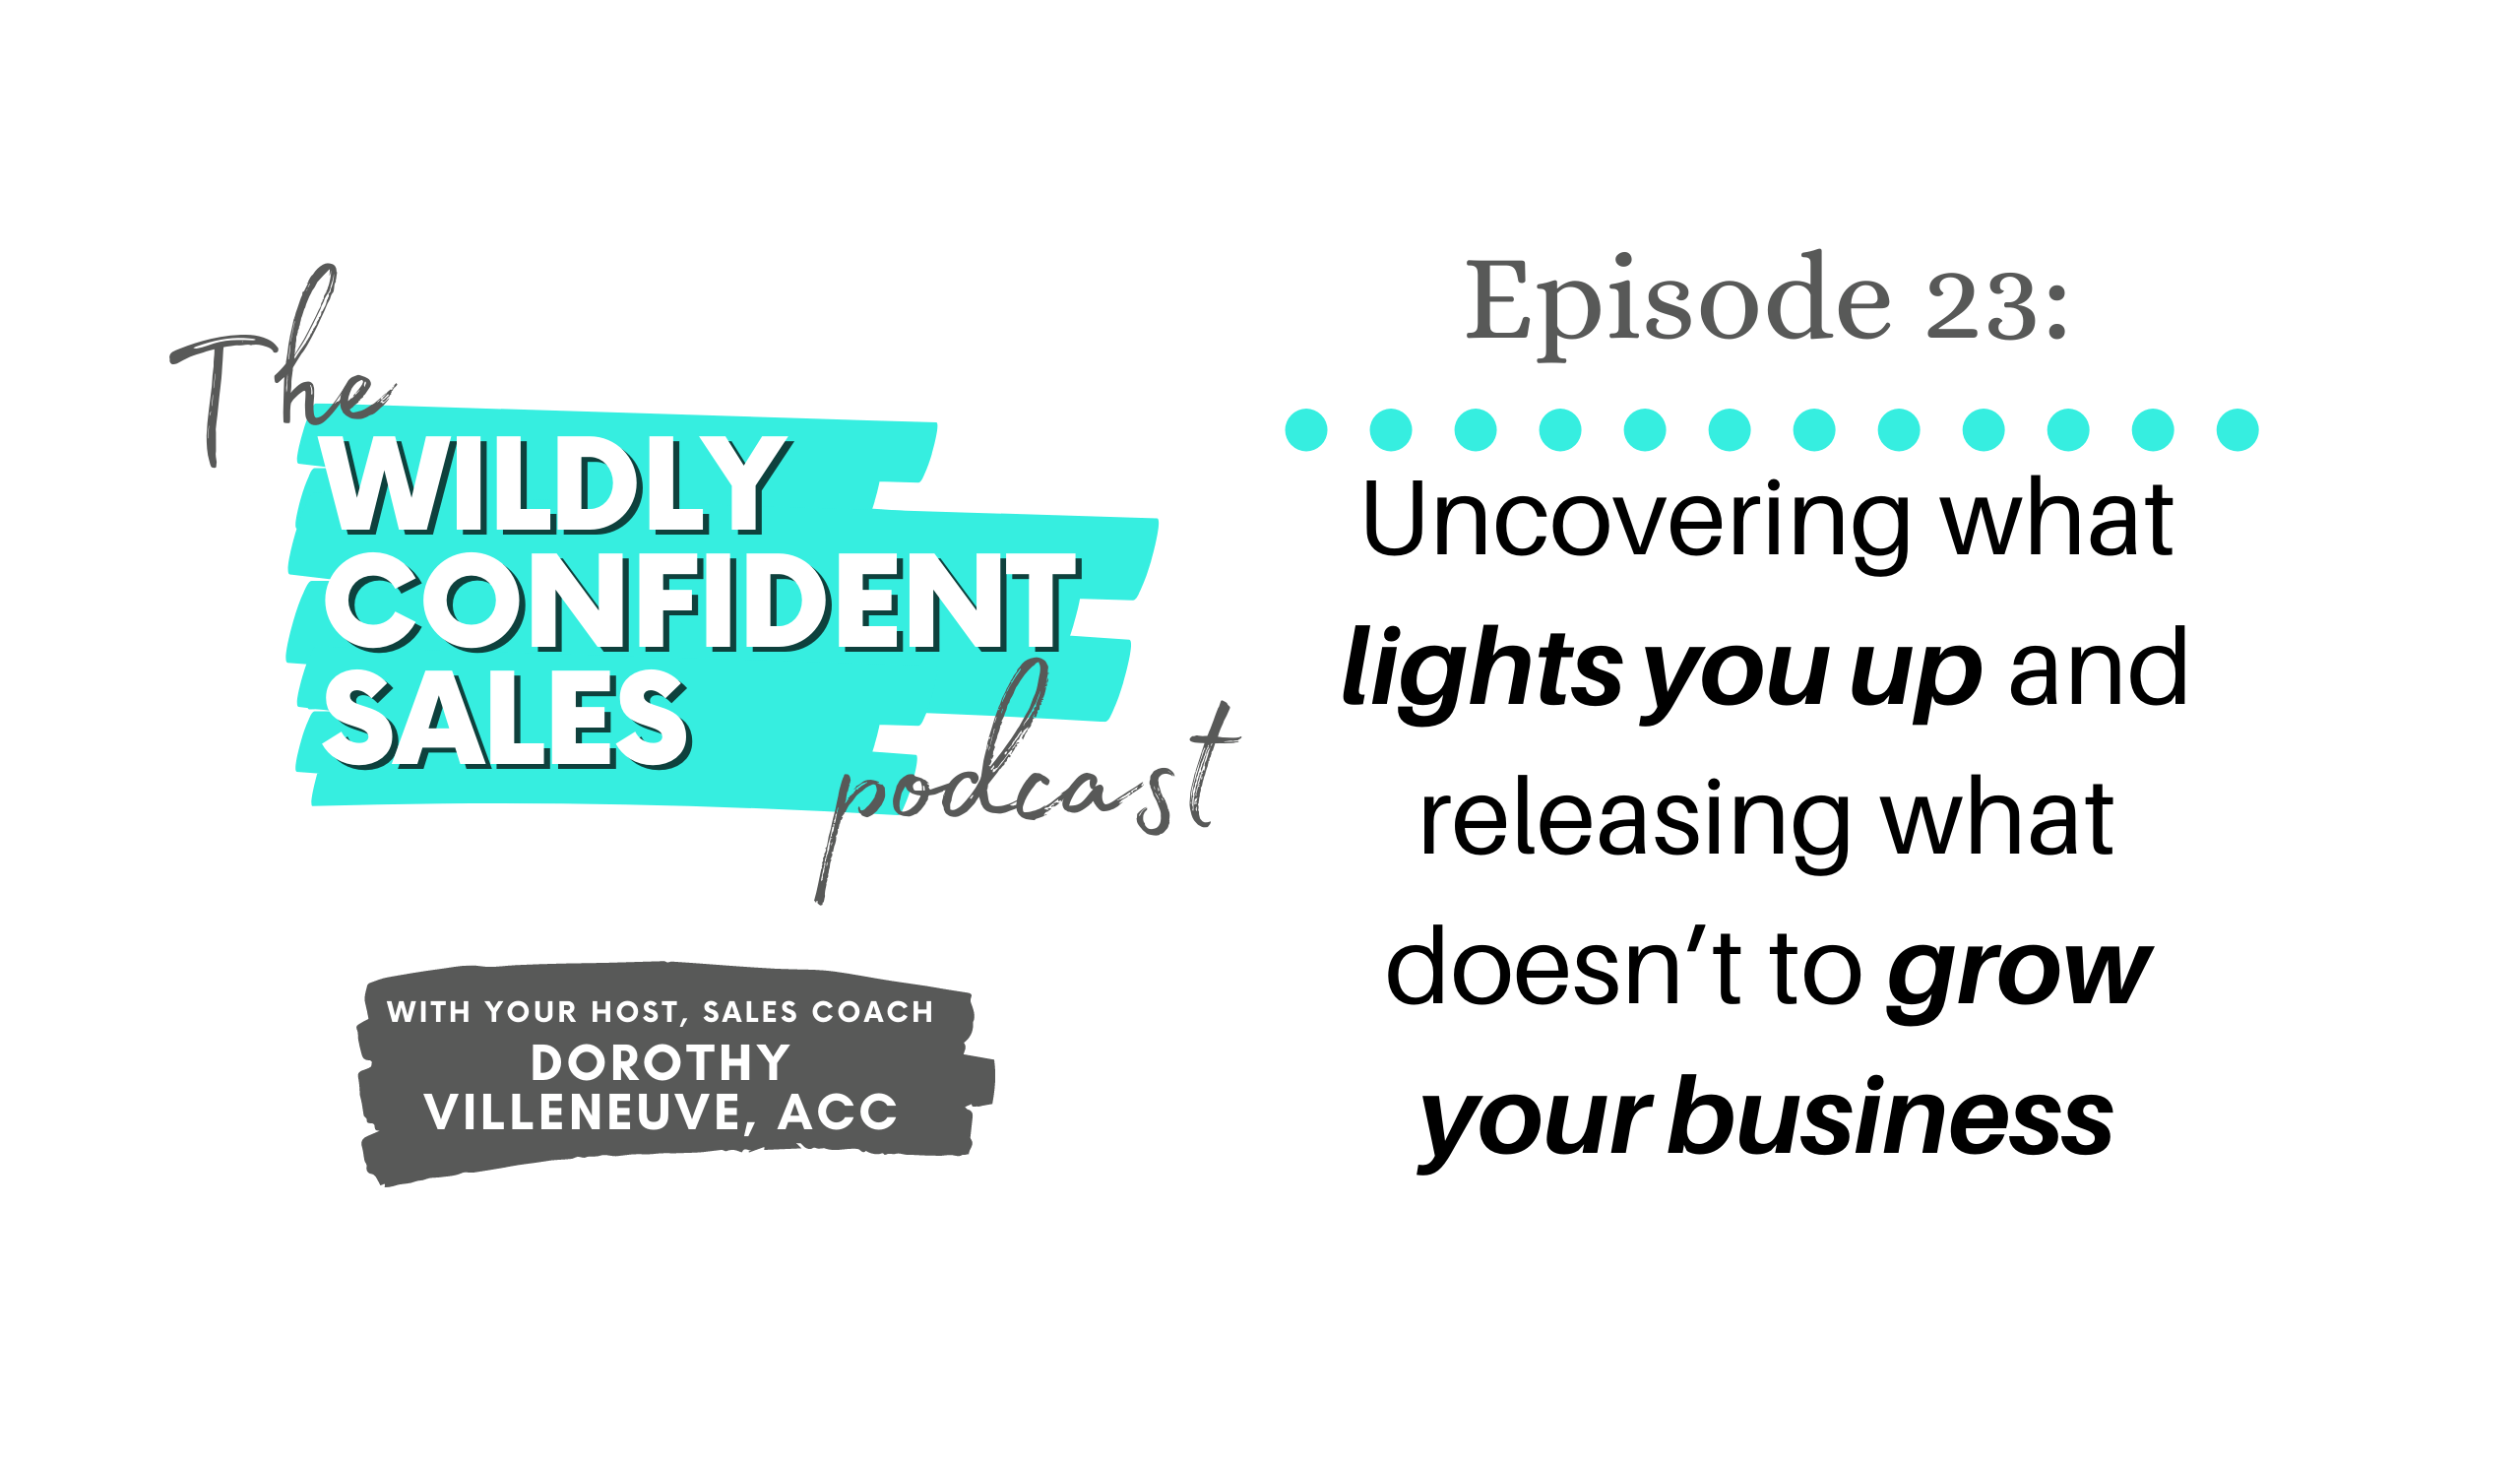 Uncovering What Lights You Up and Releasing What Doesn’t to Grow Your Business